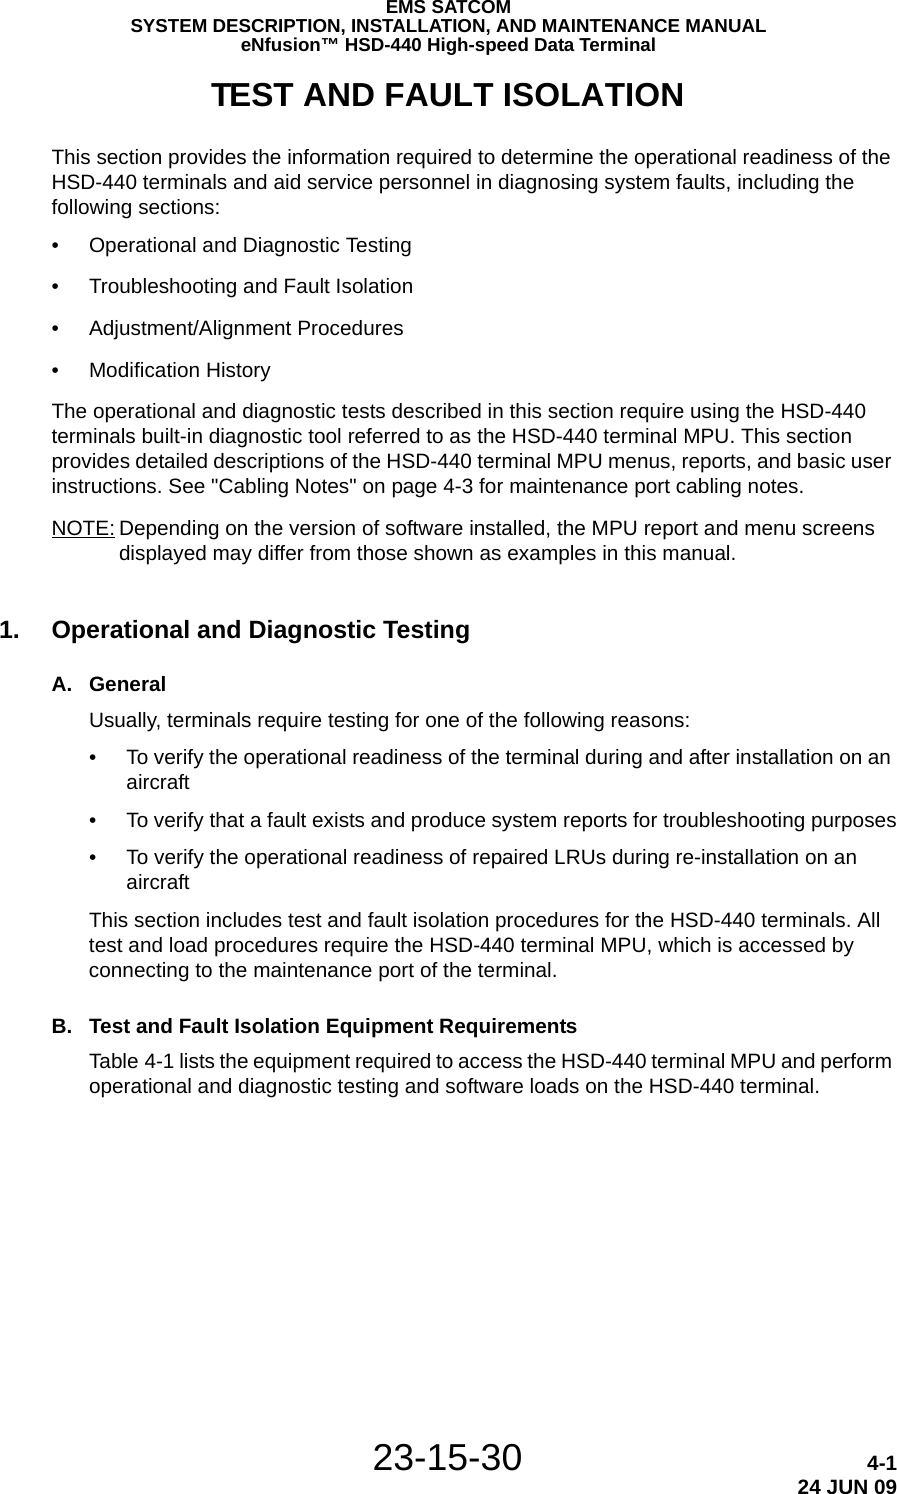 EMS SATCOMSYSTEM DESCRIPTION, INSTALLATION, AND MAINTENANCE MANUALeNfusion™ HSD-440 High-speed Data Terminal23-15-30 4-124 JUN 09TEST AND FAULT ISOLATIONThis section provides the information required to determine the operational readiness of the HSD-440 terminals and aid service personnel in diagnosing system faults, including the following sections:•Operational and Diagnostic Testing•Troubleshooting and Fault Isolation•Adjustment/Alignment Procedures•Modification HistoryThe operational and diagnostic tests described in this section require using the HSD-440 terminals built-in diagnostic tool referred to as the HSD-440 terminal MPU. This section provides detailed descriptions of the HSD-440 terminal MPU menus, reports, and basic user instructions. See &quot;Cabling Notes&quot; on page 4-3 for maintenance port cabling notes.NOTE: Depending on the version of software installed, the MPU report and menu screens displayed may differ from those shown as examples in this manual.1. Operational and Diagnostic TestingA. GeneralUsually, terminals require testing for one of the following reasons:• To verify the operational readiness of the terminal during and after installation on an aircraft• To verify that a fault exists and produce system reports for troubleshooting purposes• To verify the operational readiness of repaired LRUs during re-installation on an aircraftThis section includes test and fault isolation procedures for the HSD-440 terminals. All test and load procedures require the HSD-440 terminal MPU, which is accessed by connecting to the maintenance port of the terminal. B. Test and Fault Isolation Equipment RequirementsTable 4-1 lists the equipment required to access the HSD-440 terminal MPU and perform operational and diagnostic testing and software loads on the HSD-440 terminal. 